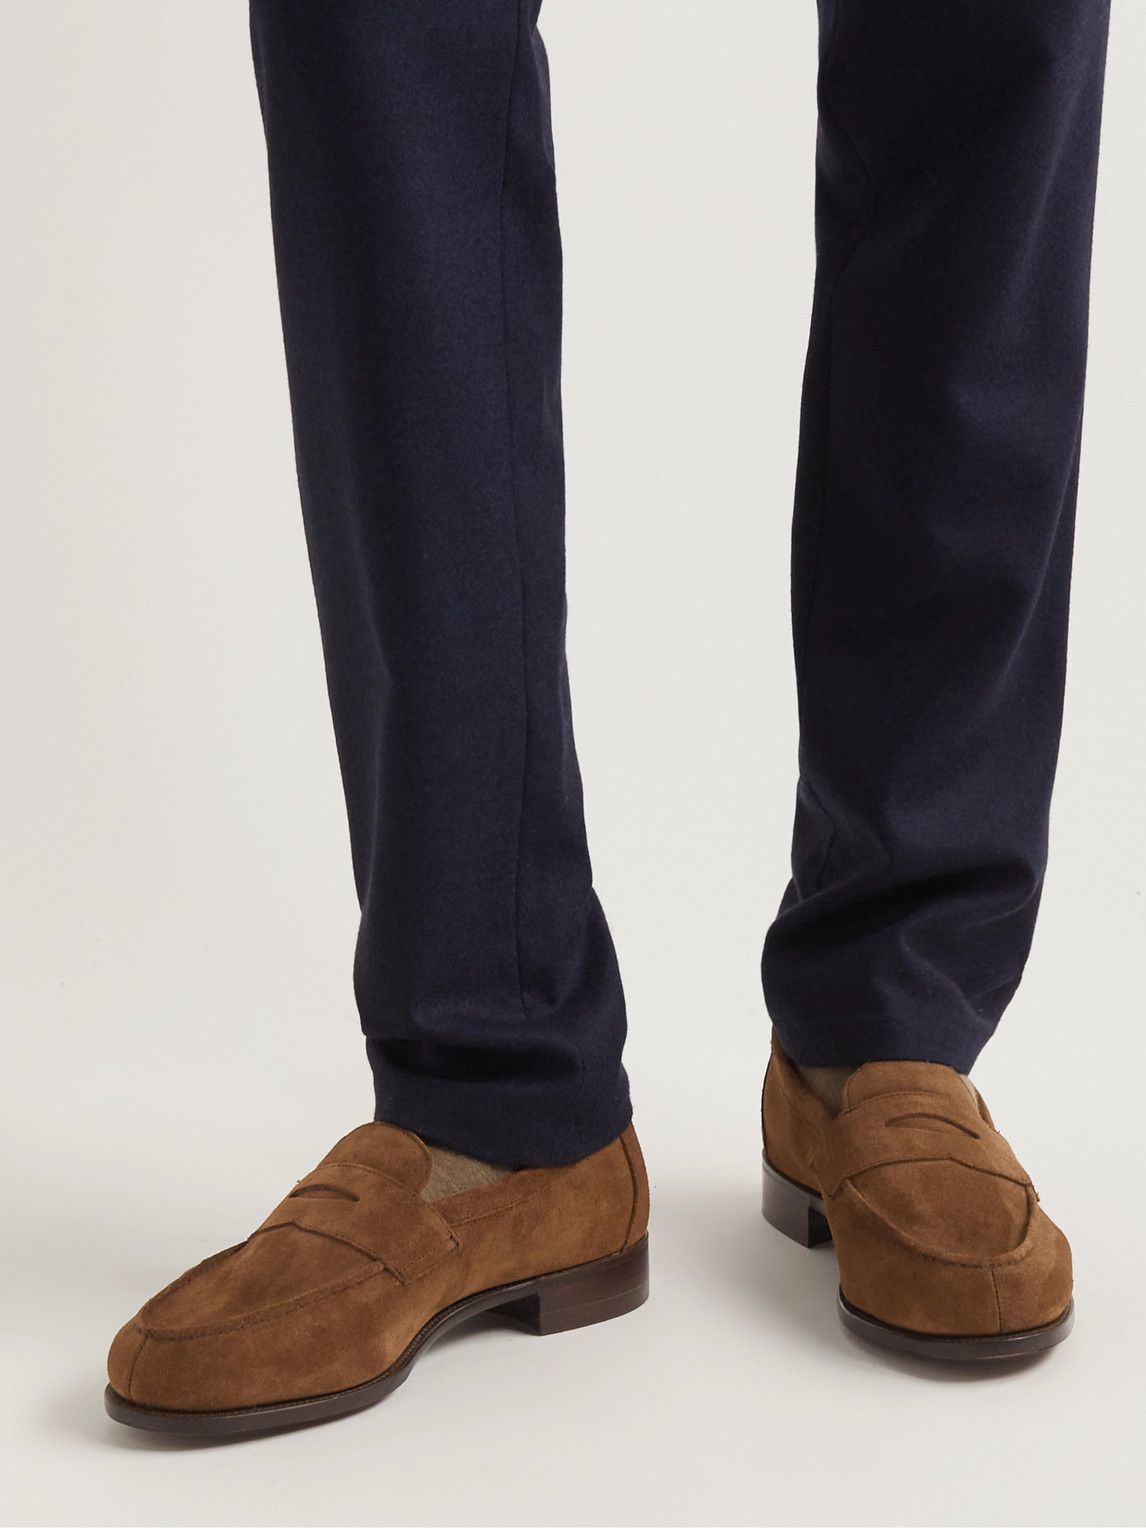 George Cleverley - Cannes Suede Penny Loafers - Brown George Cleverley